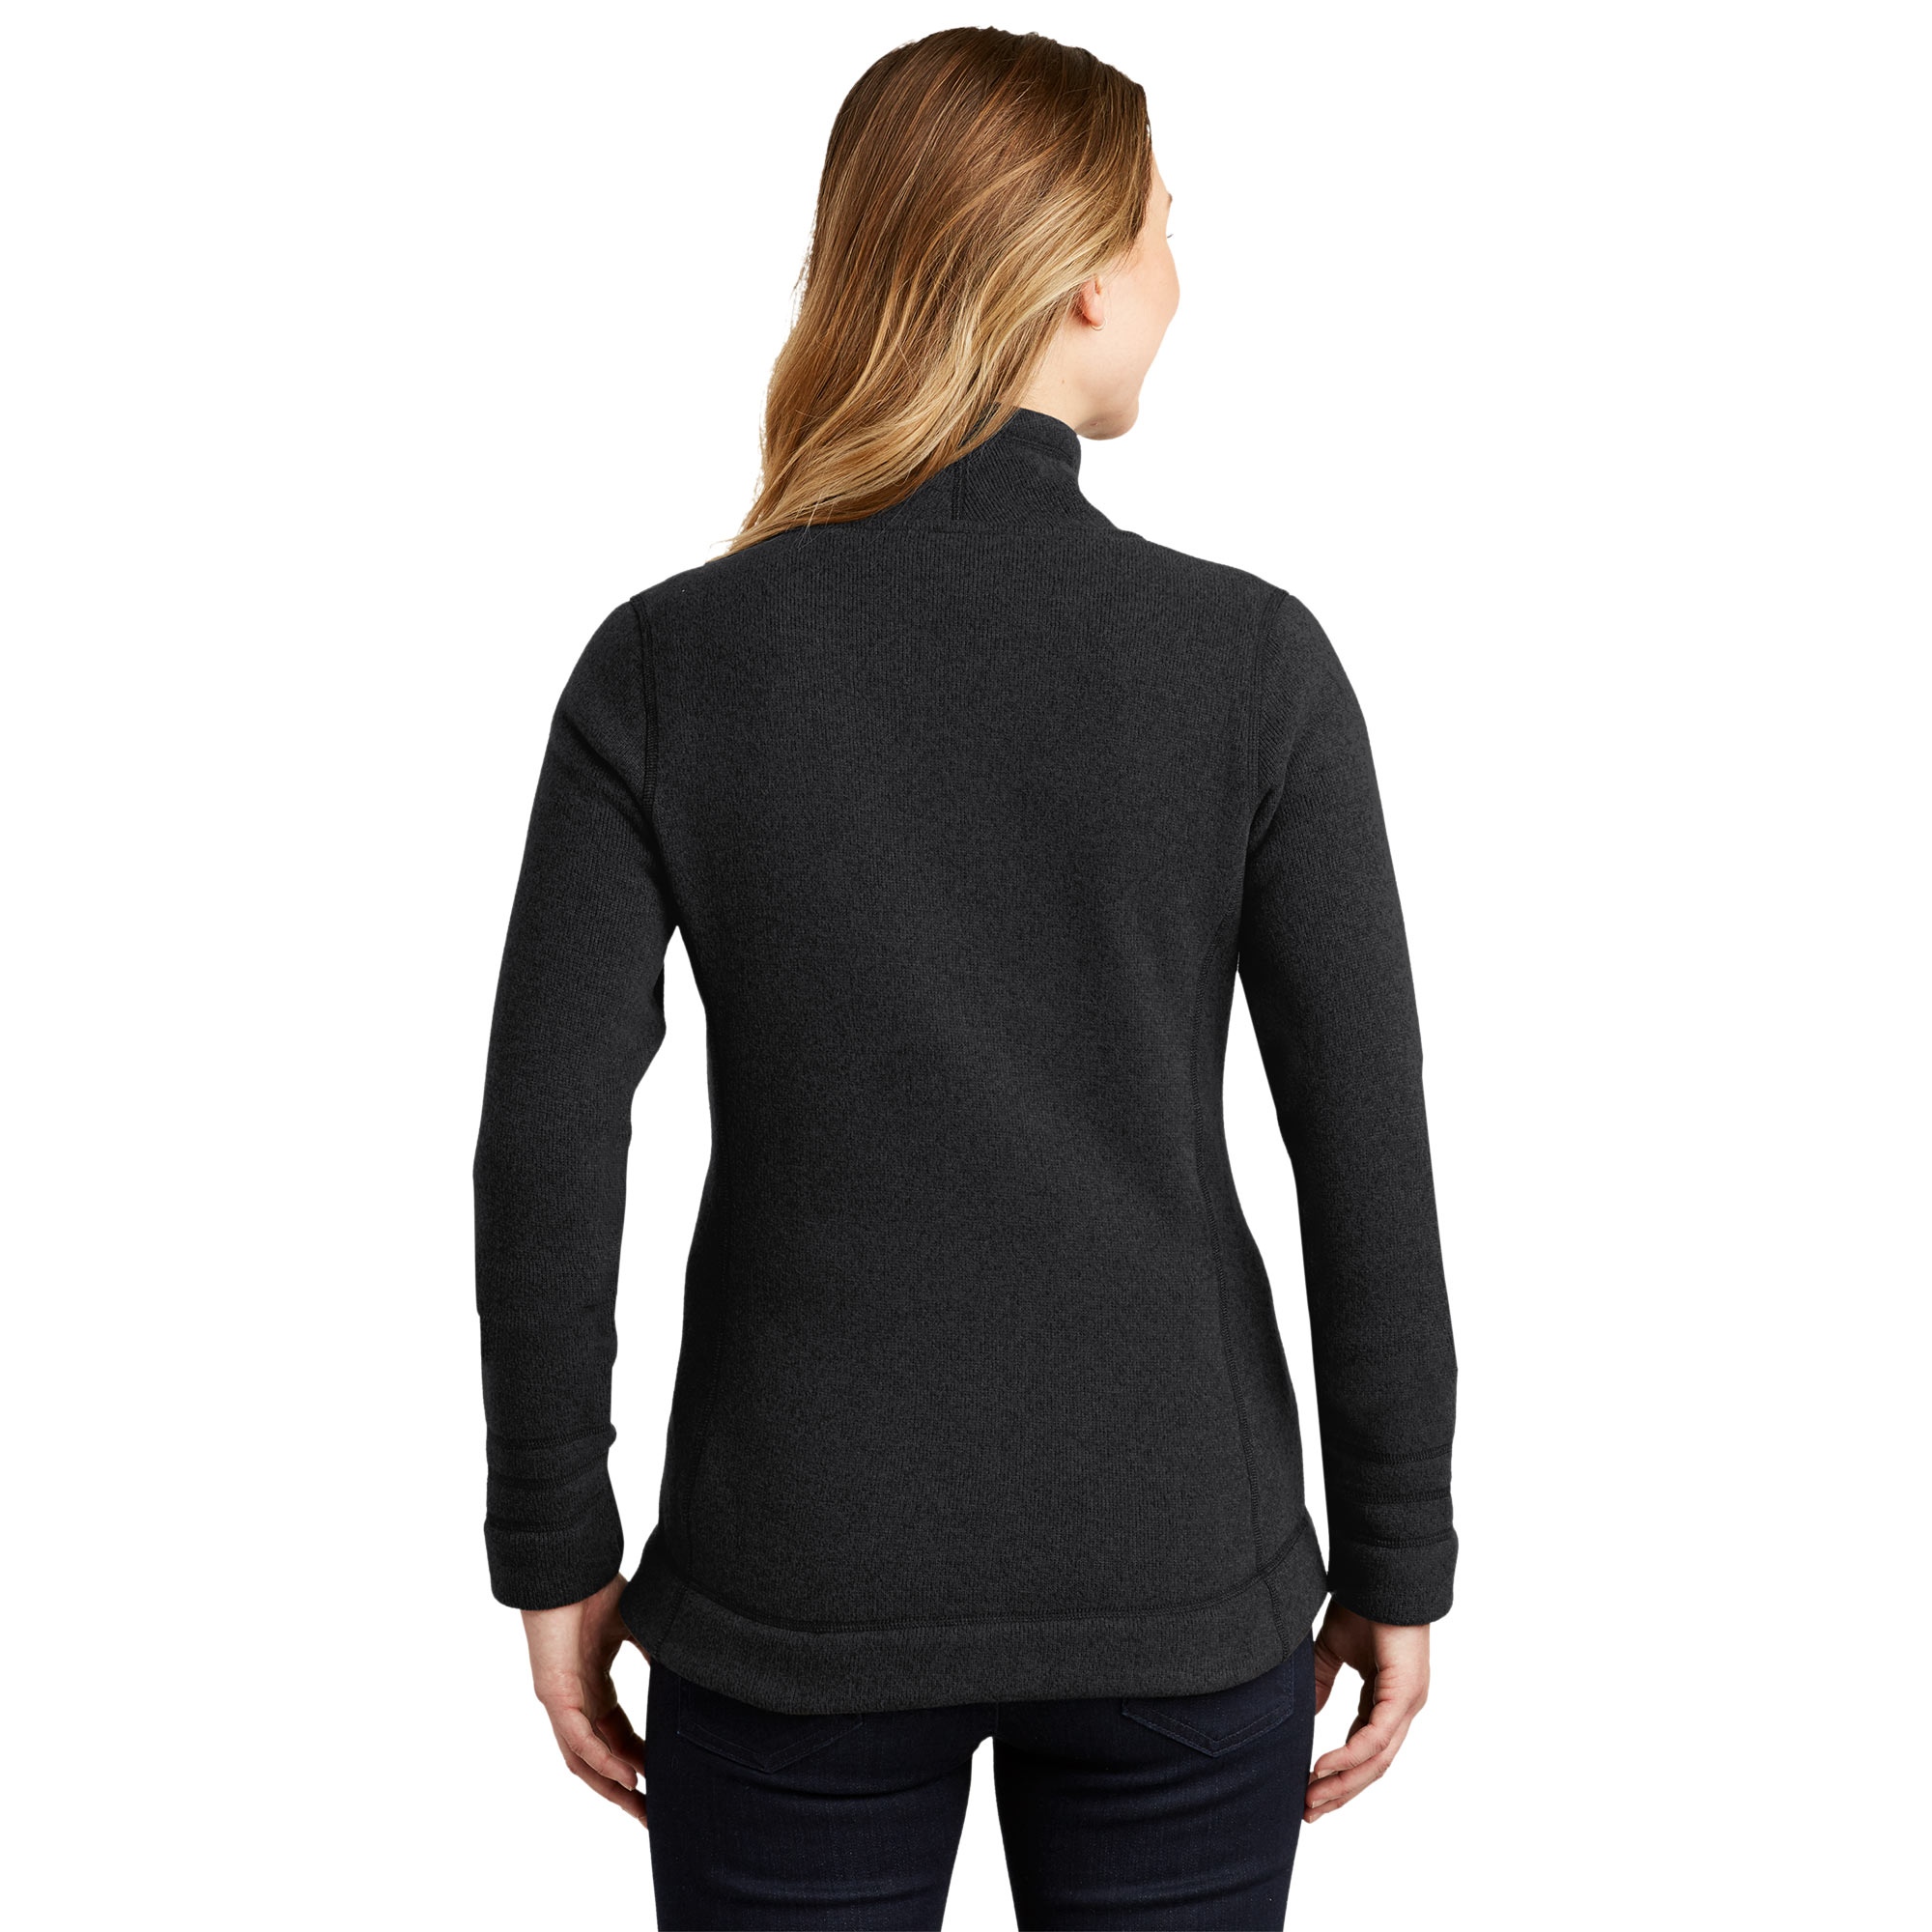 The North Face [NF0A3LH8] Ladies Sweater Fleece Jacket. Live Chat for Bulk  Discounts.